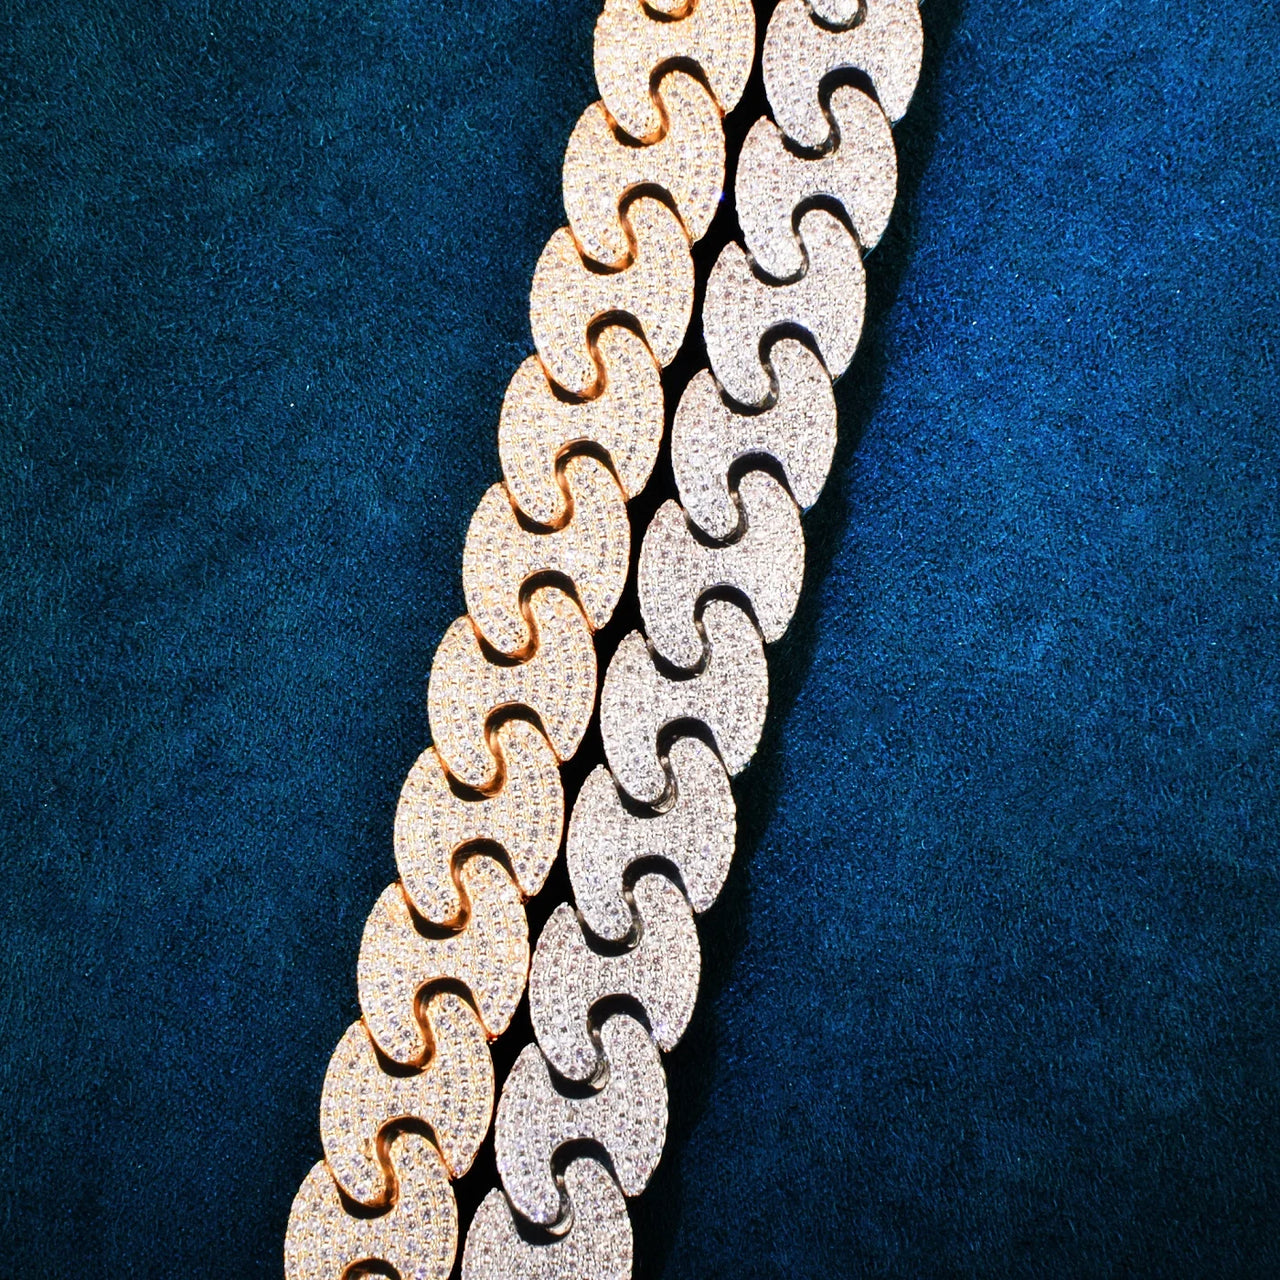 12mm Iced Mariner Link Chain - Different Drips